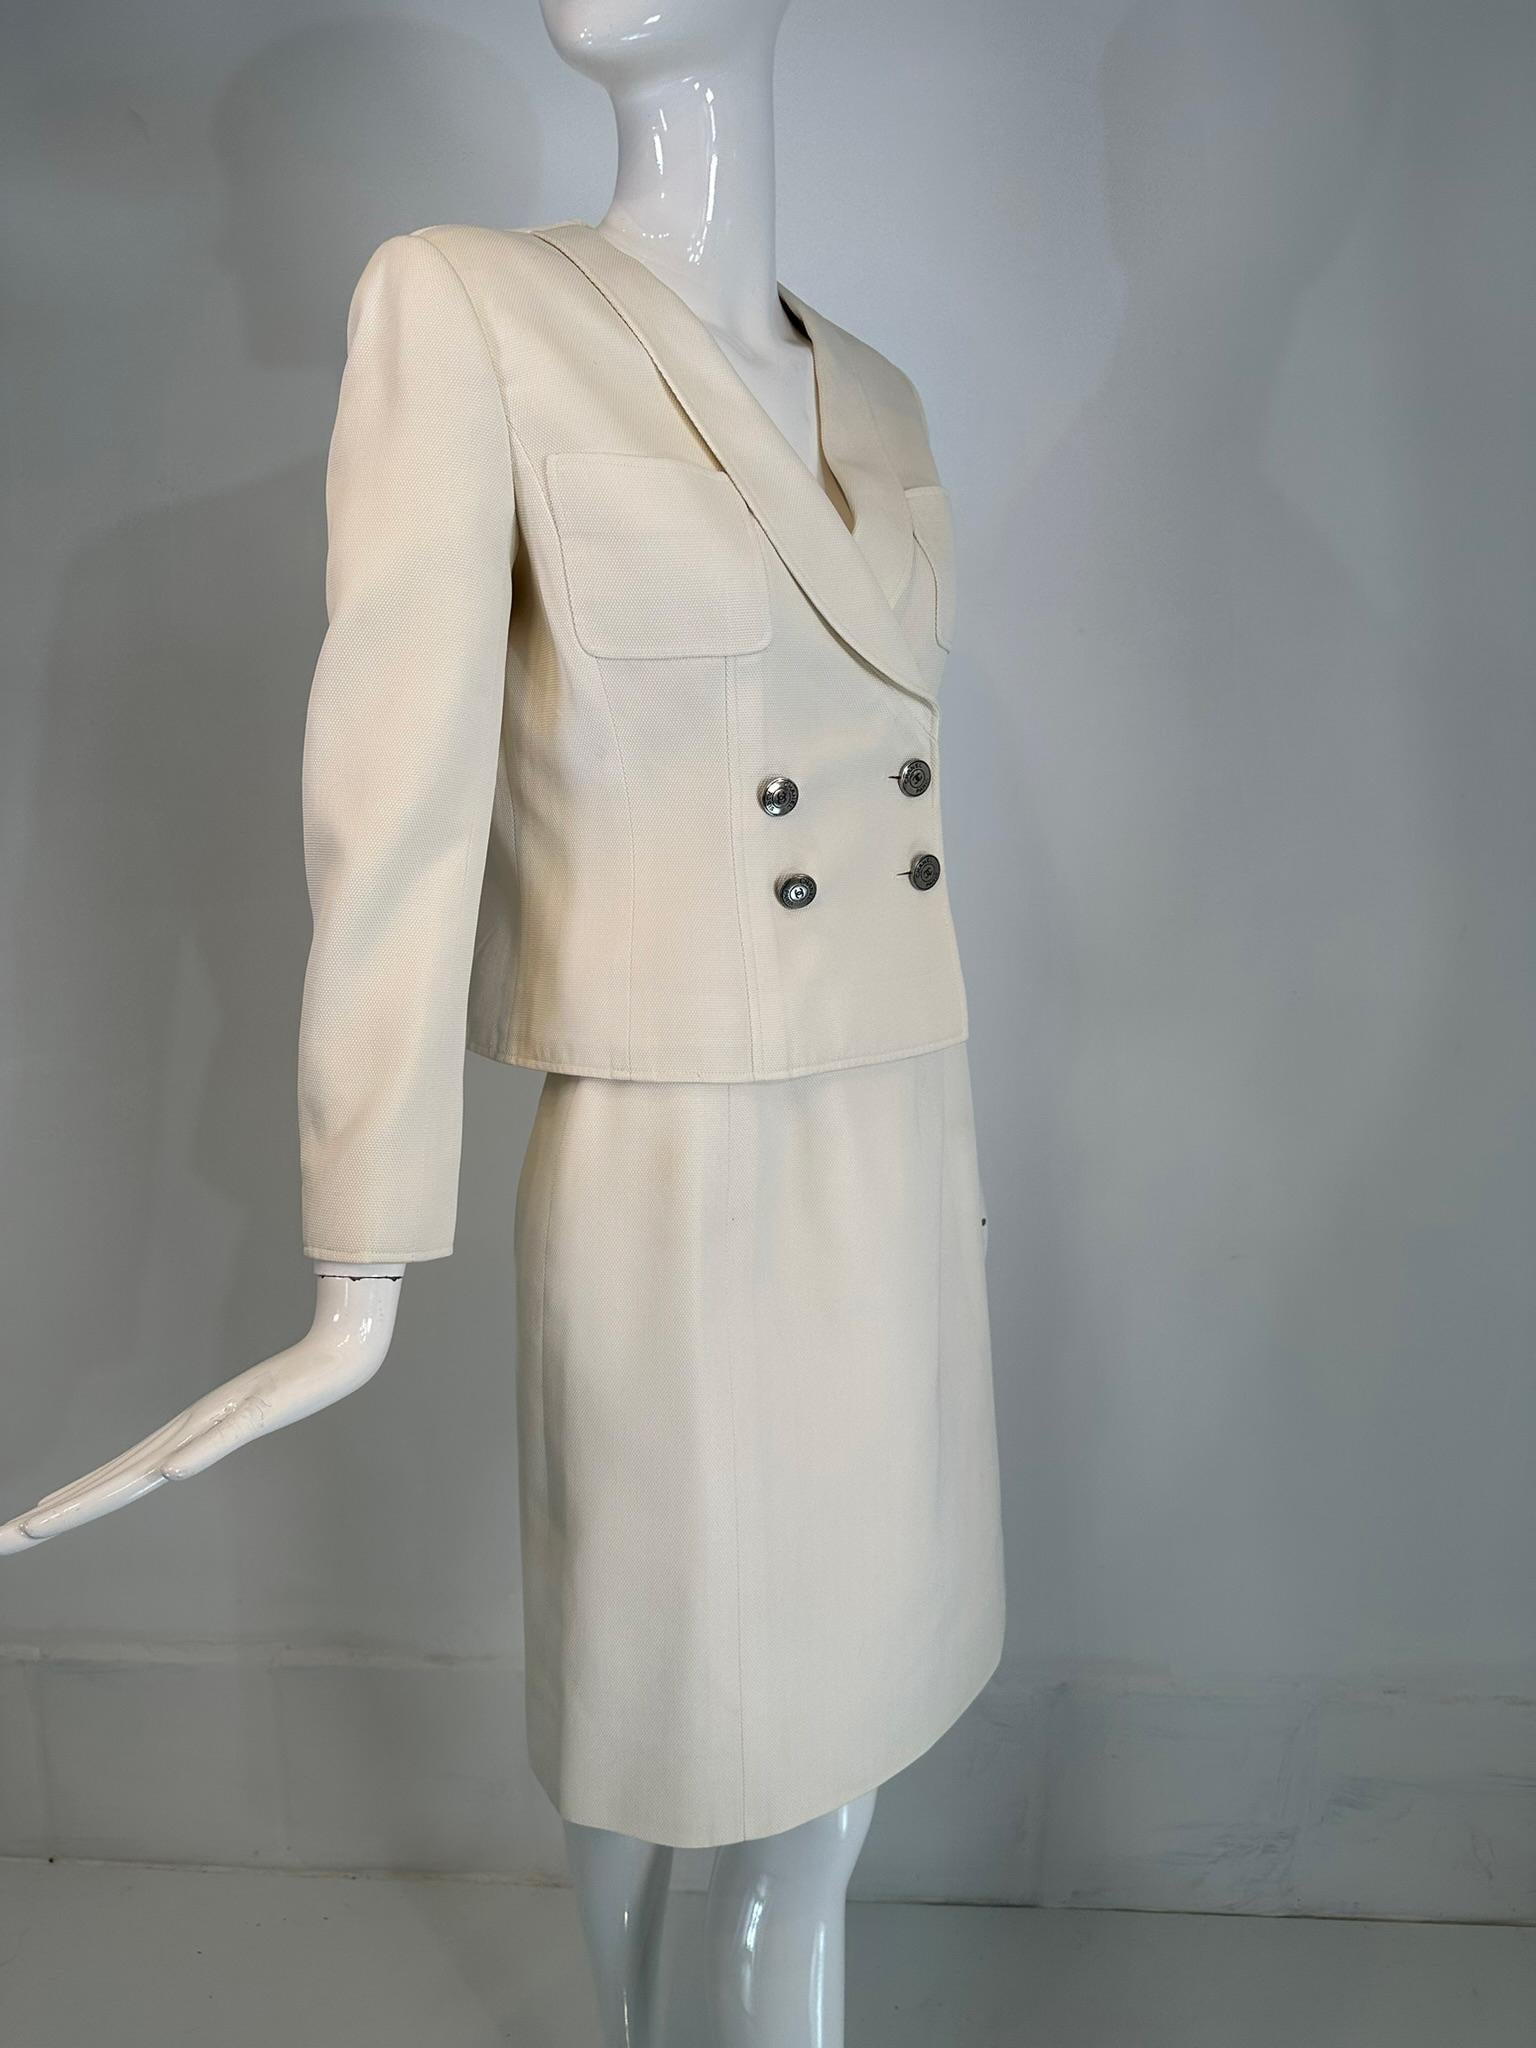 Chanel 1997 C Off White Cotton Pique Double Breasted Cropped Jacket & Skirt 40 For Sale 7